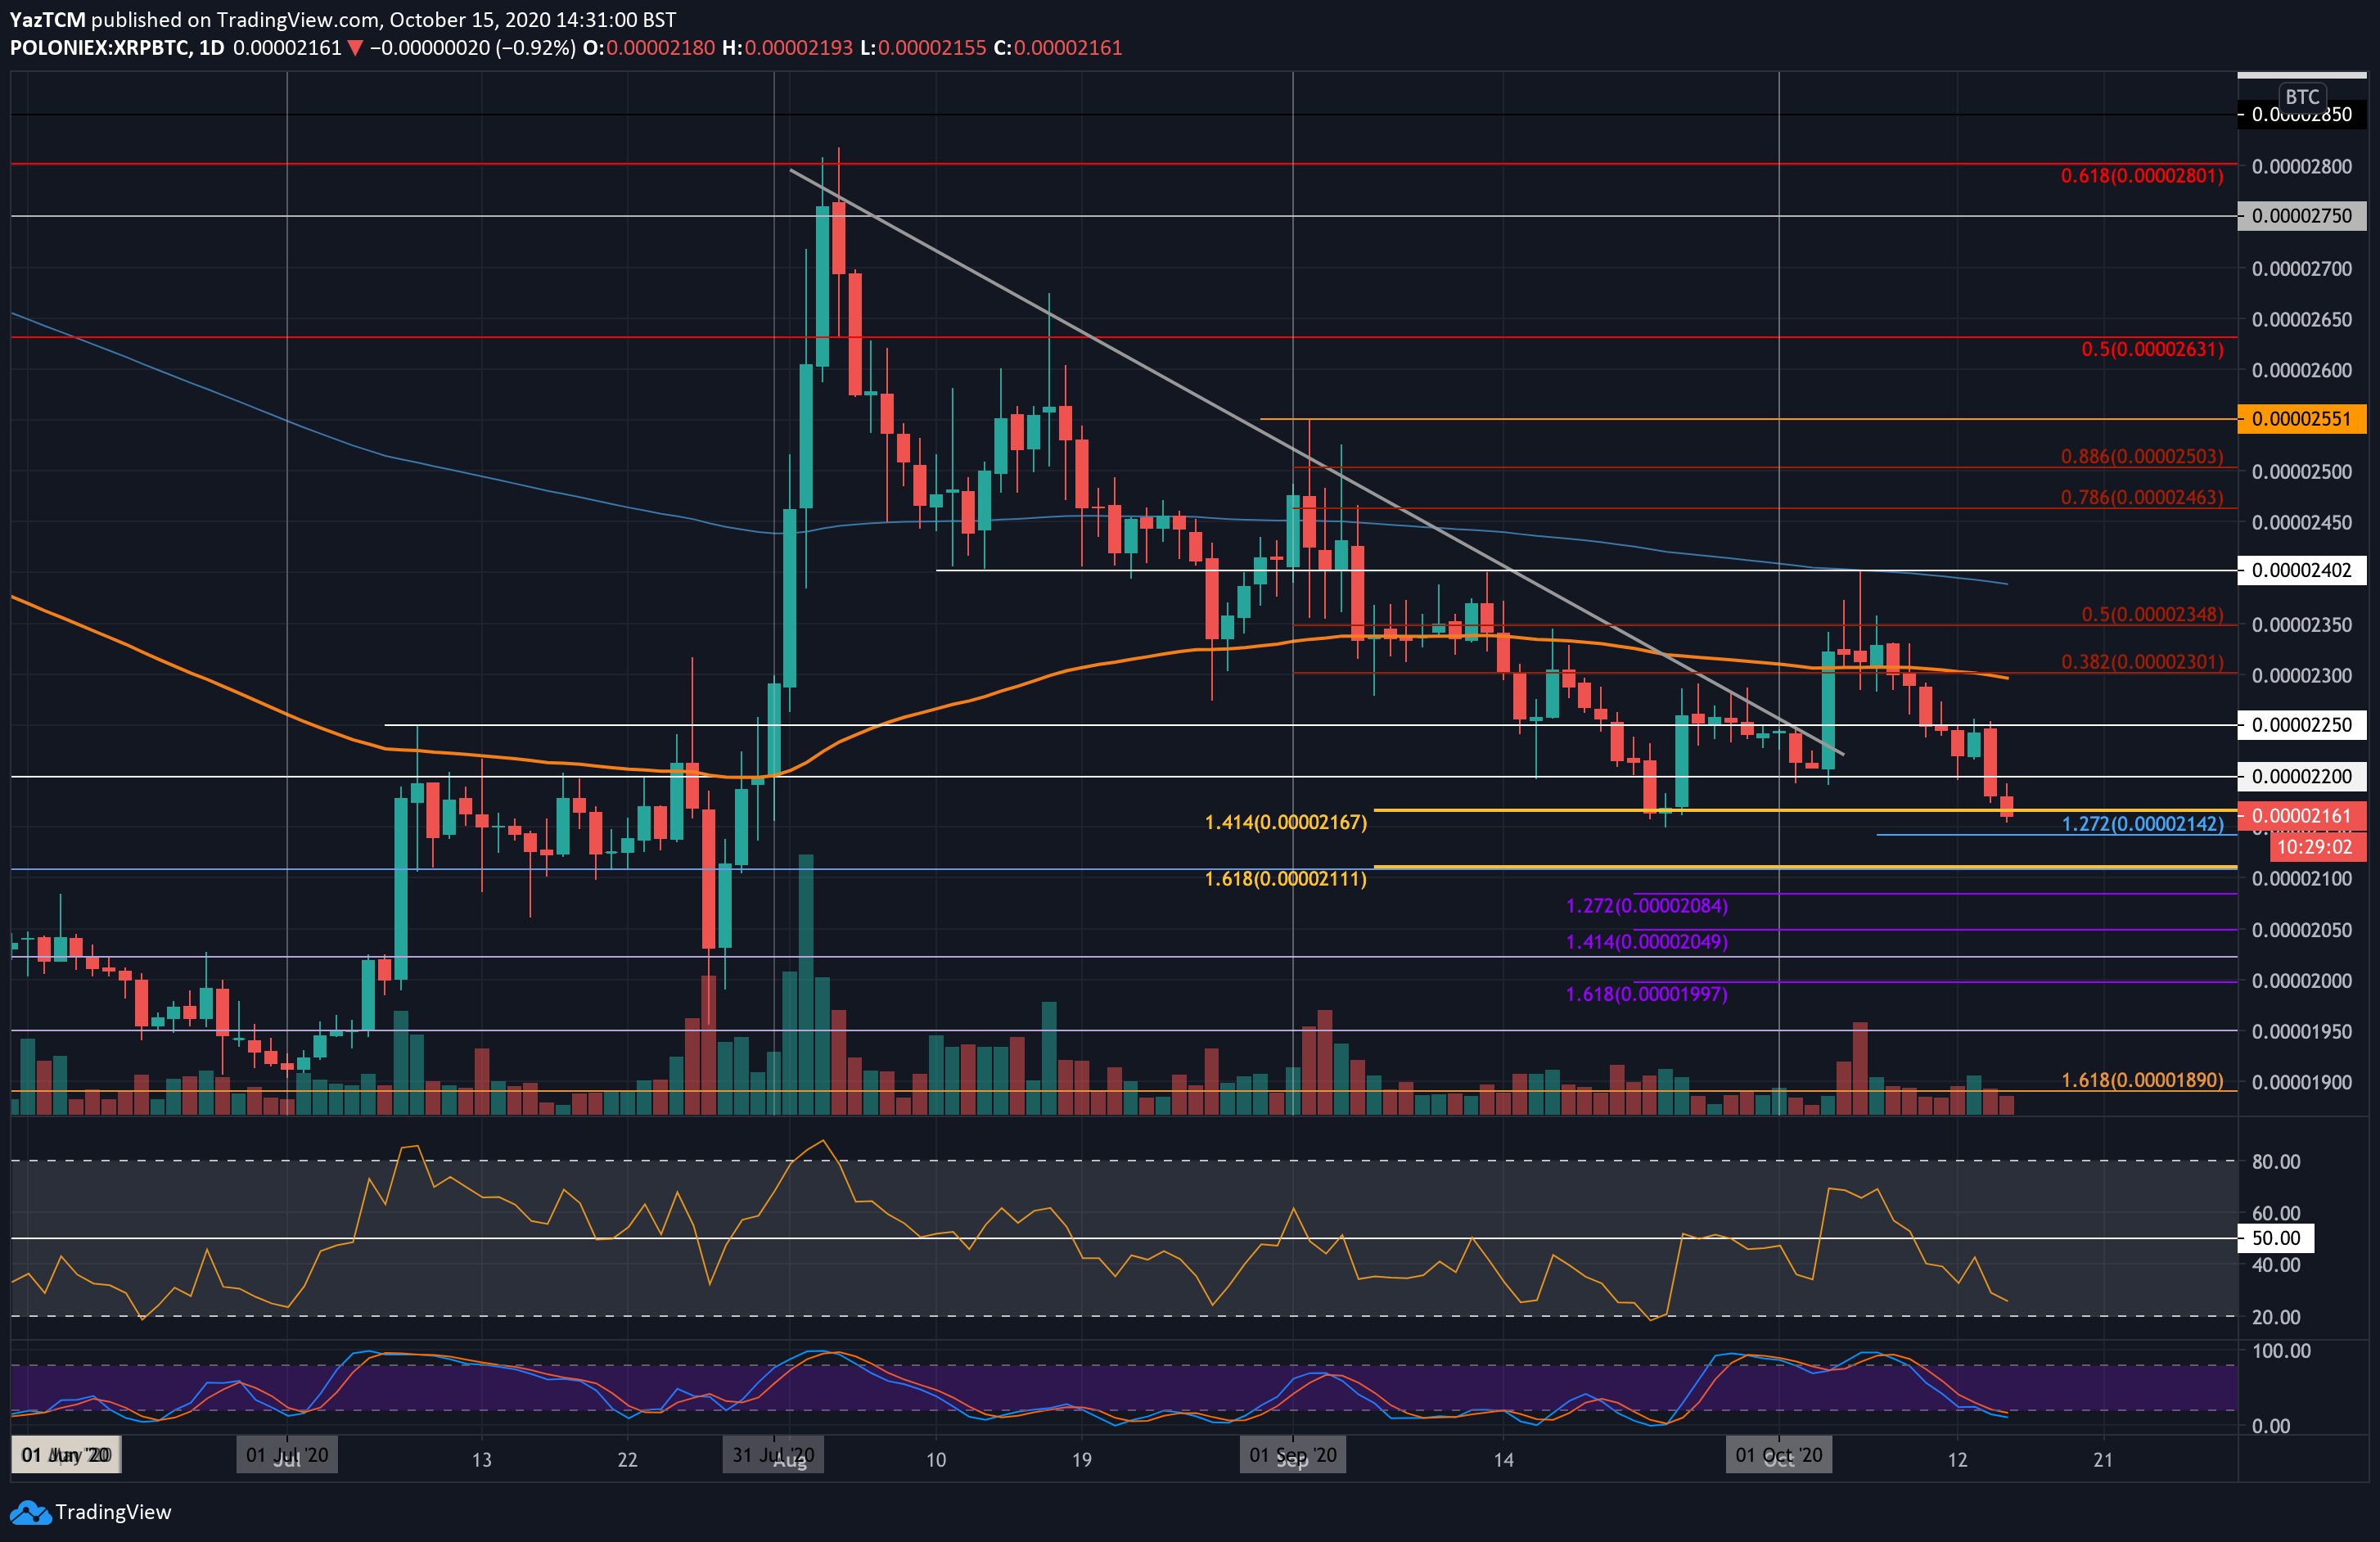 Ripple Bears Resurface to Test 100 EMA Support, Will it Hold? (XRP Price Analysis)